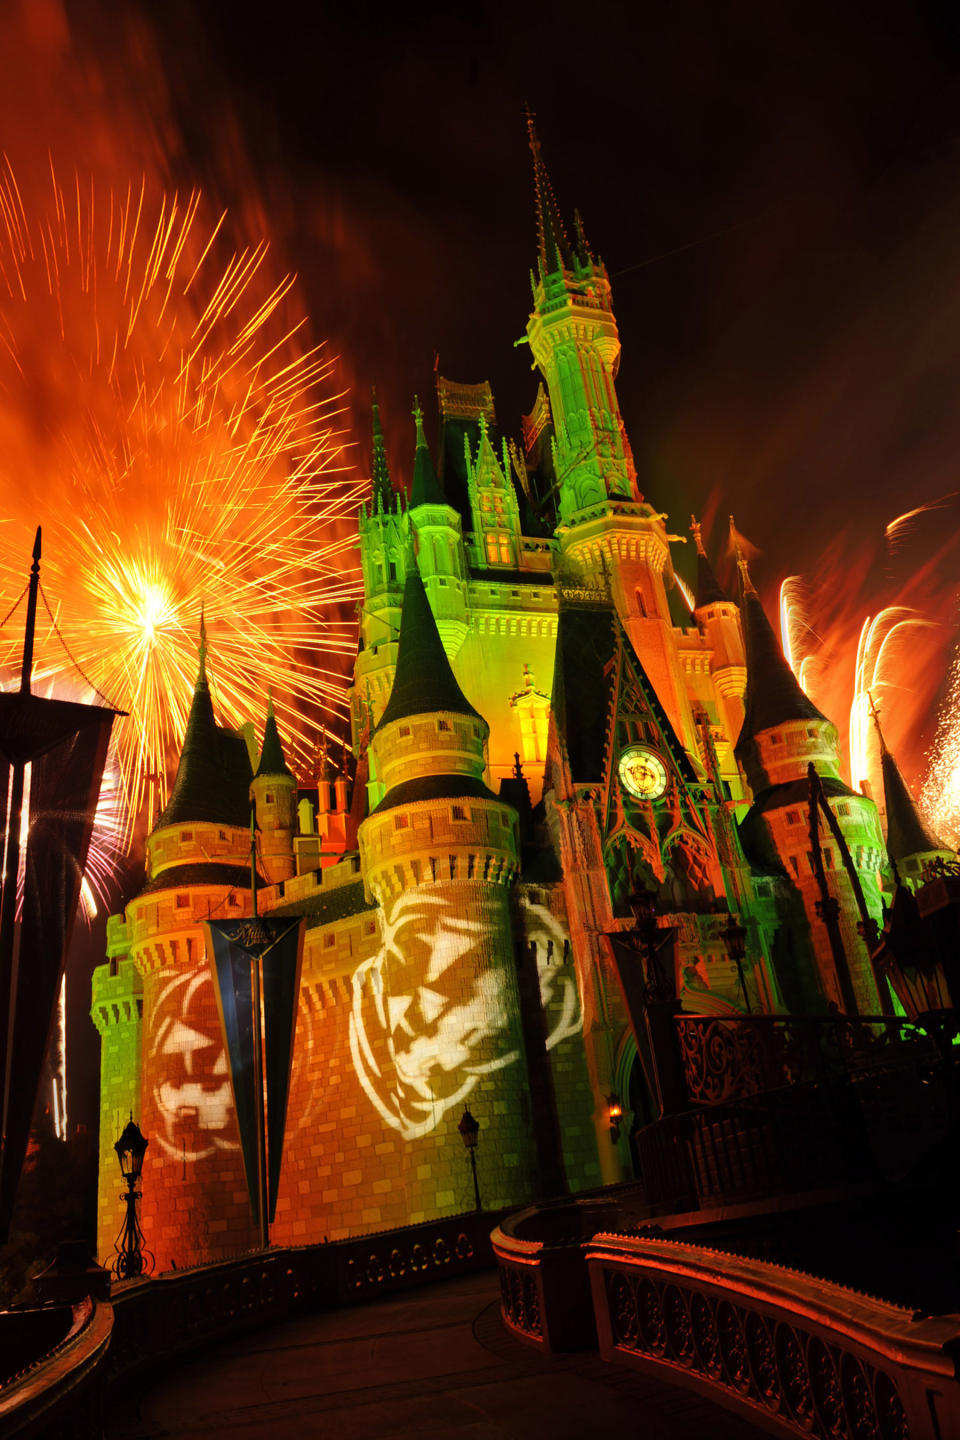 This undated image released by Disney shows orange fireworks exploding over Cinderella's Castle while illuminated pumpkins are projected with light during the "Happy HalloWishes" fireworks show at Magic Kingdom in Lake Buena Vista, Fla. (AP Photo/Disney, Gene Duncan)